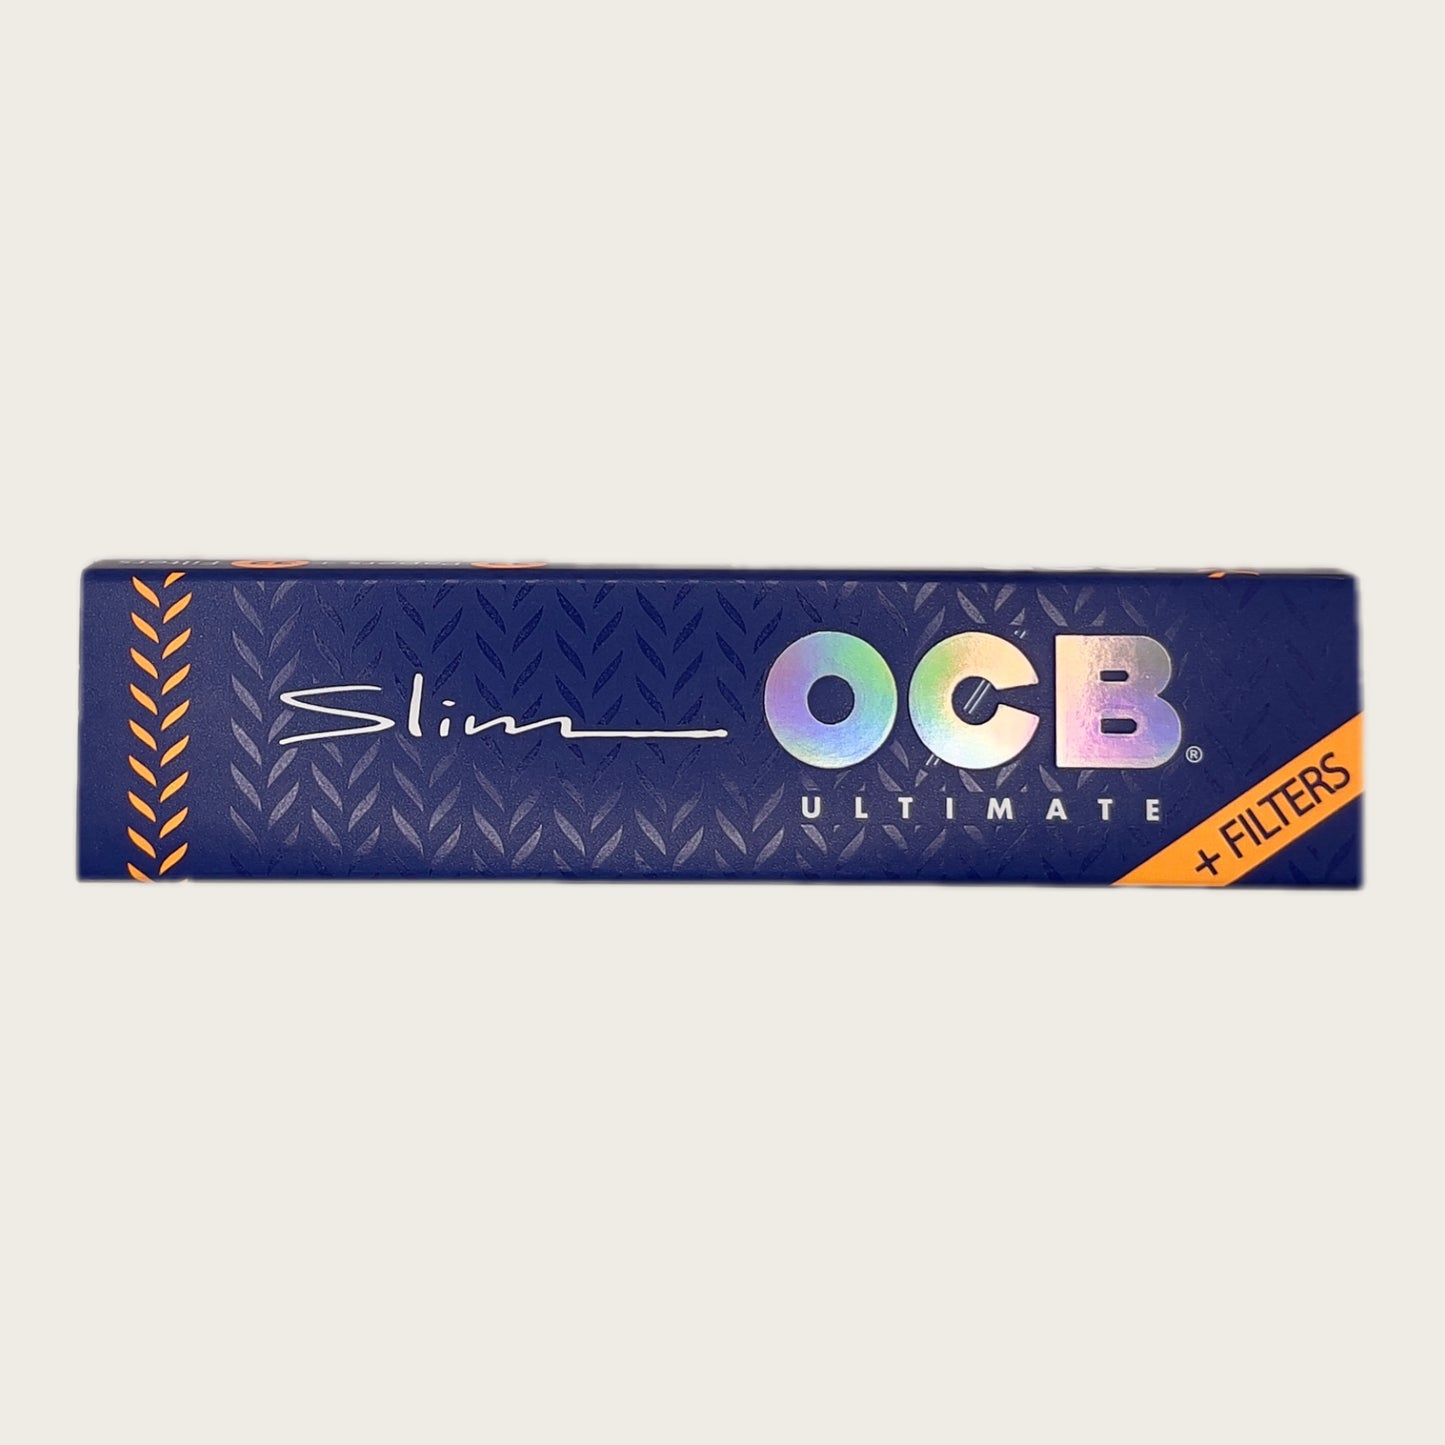 OCB ULTIMATE SLIM PAPERS & TIPS - CANNACON - THAILANDS PREMIUM CANNABIS DELIVERY